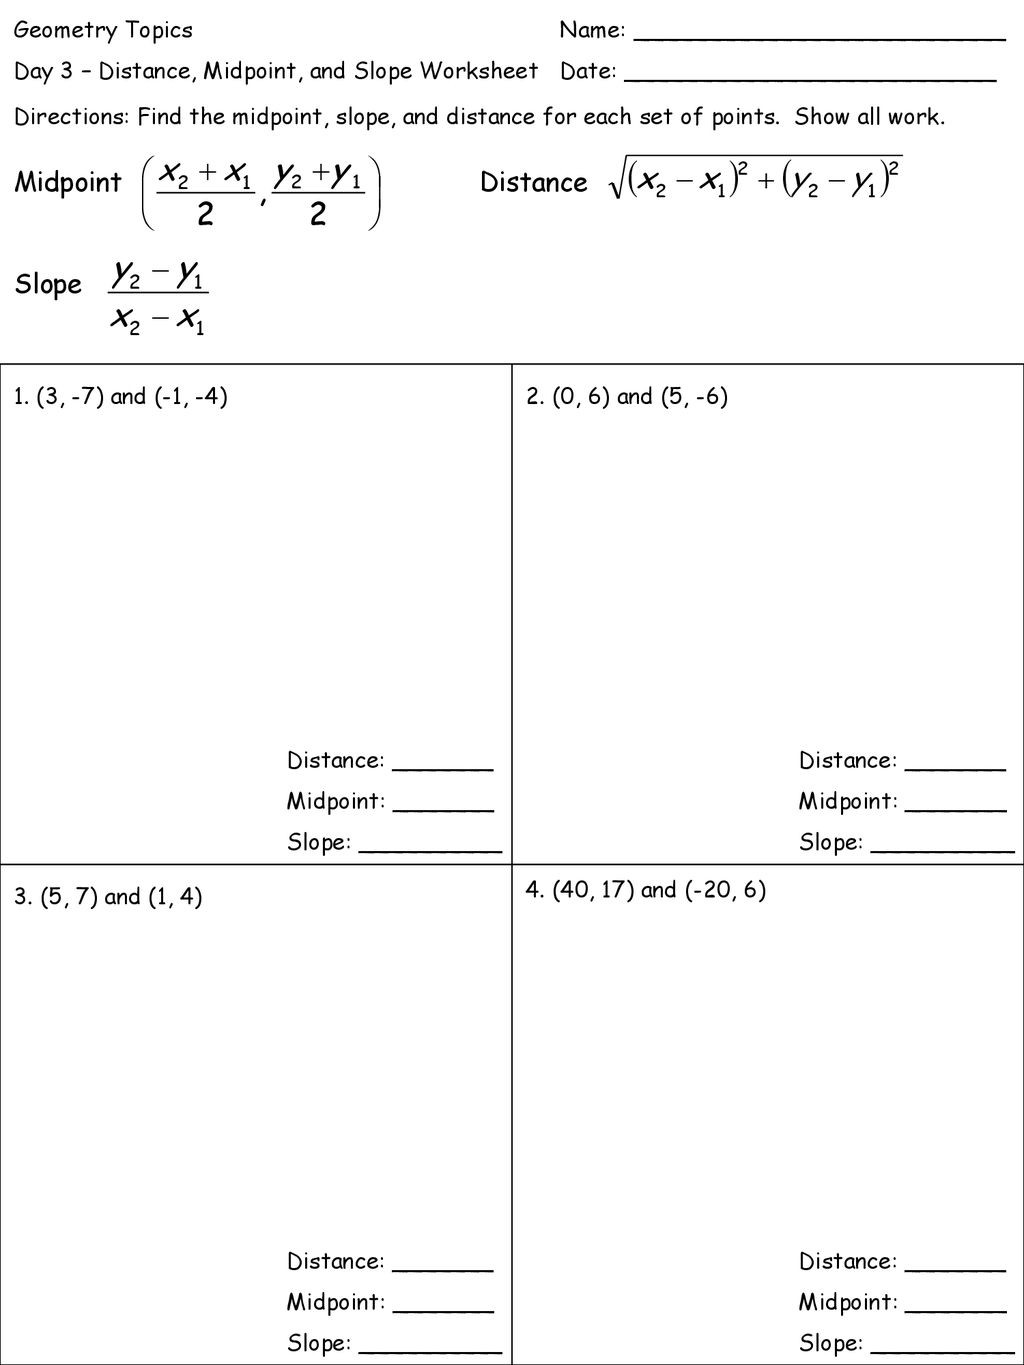 The Midpoint formula Worksheet Geometry topics Name Ppt